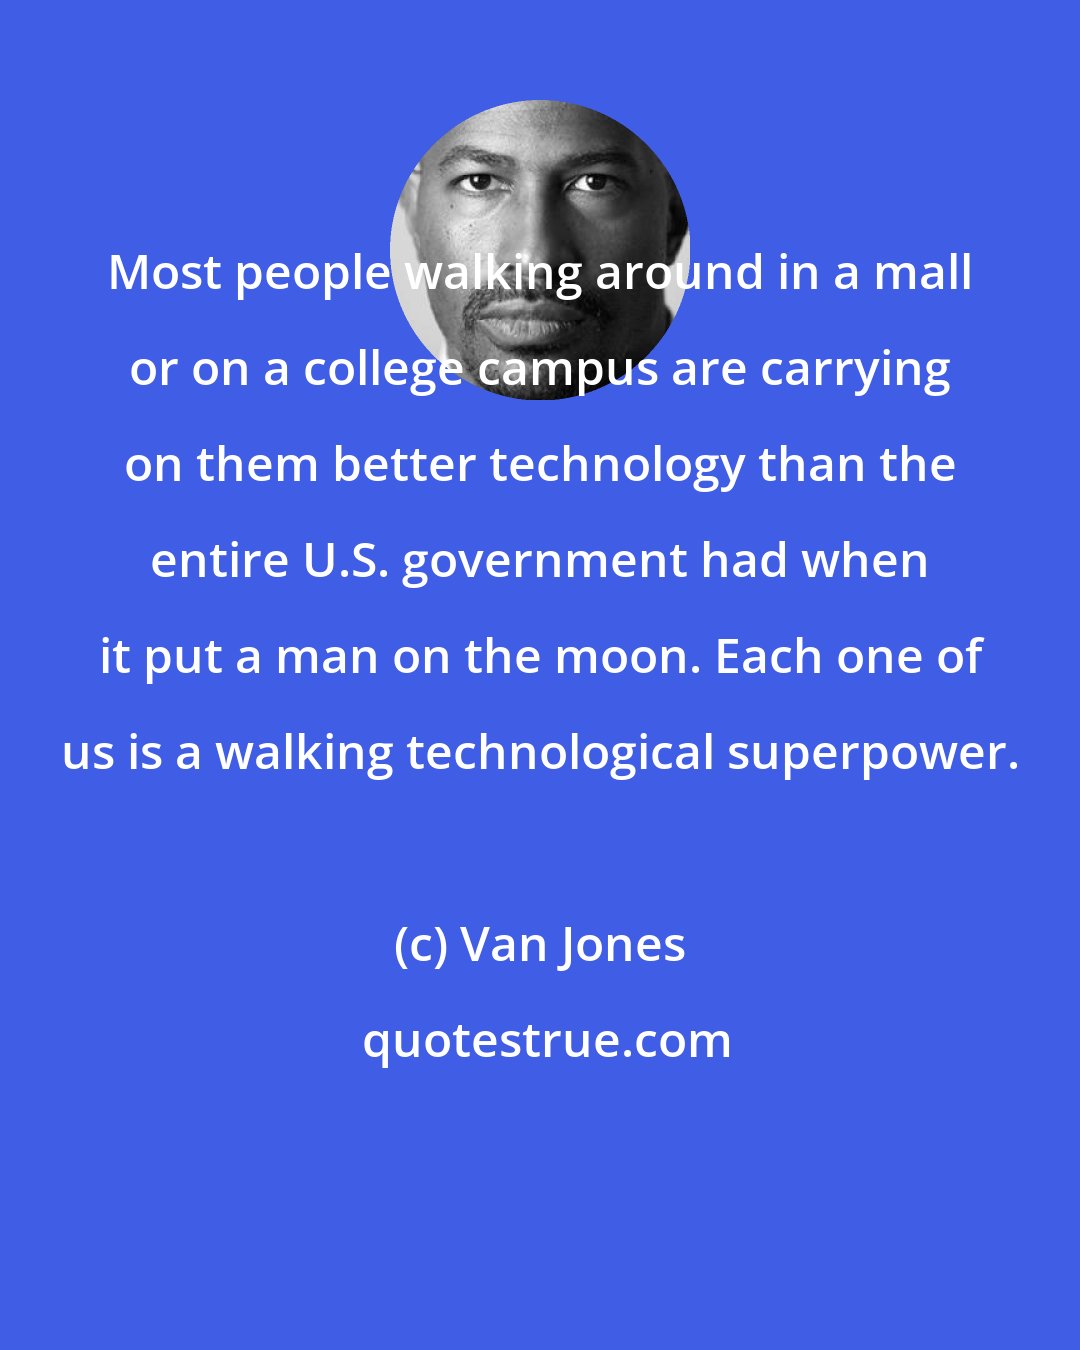 Van Jones: Most people walking around in a mall or on a college campus are carrying on them better technology than the entire U.S. government had when it put a man on the moon. Each one of us is a walking technological superpower.